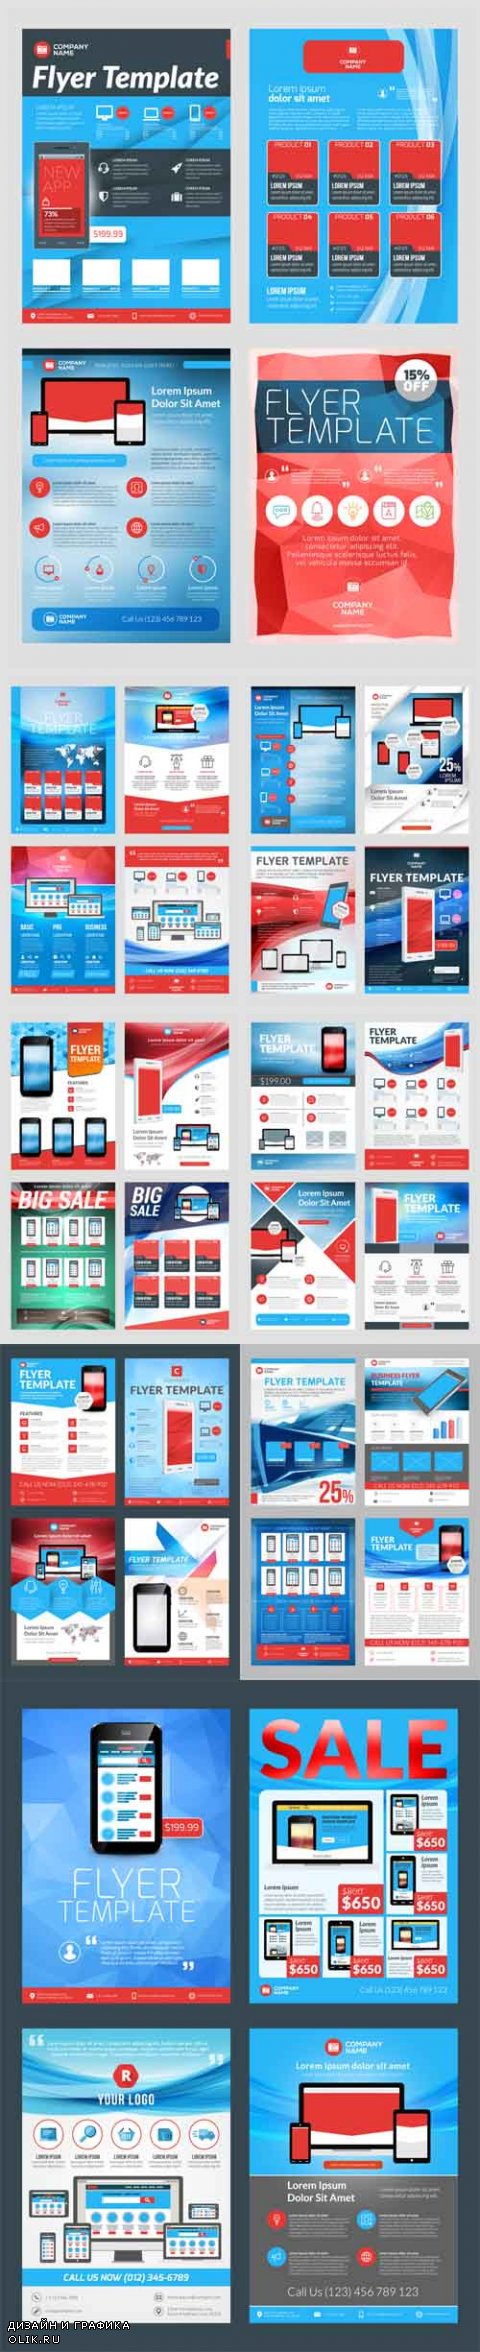 Vector Business Flyer Design Templates for Mobile Application or New Smartphone